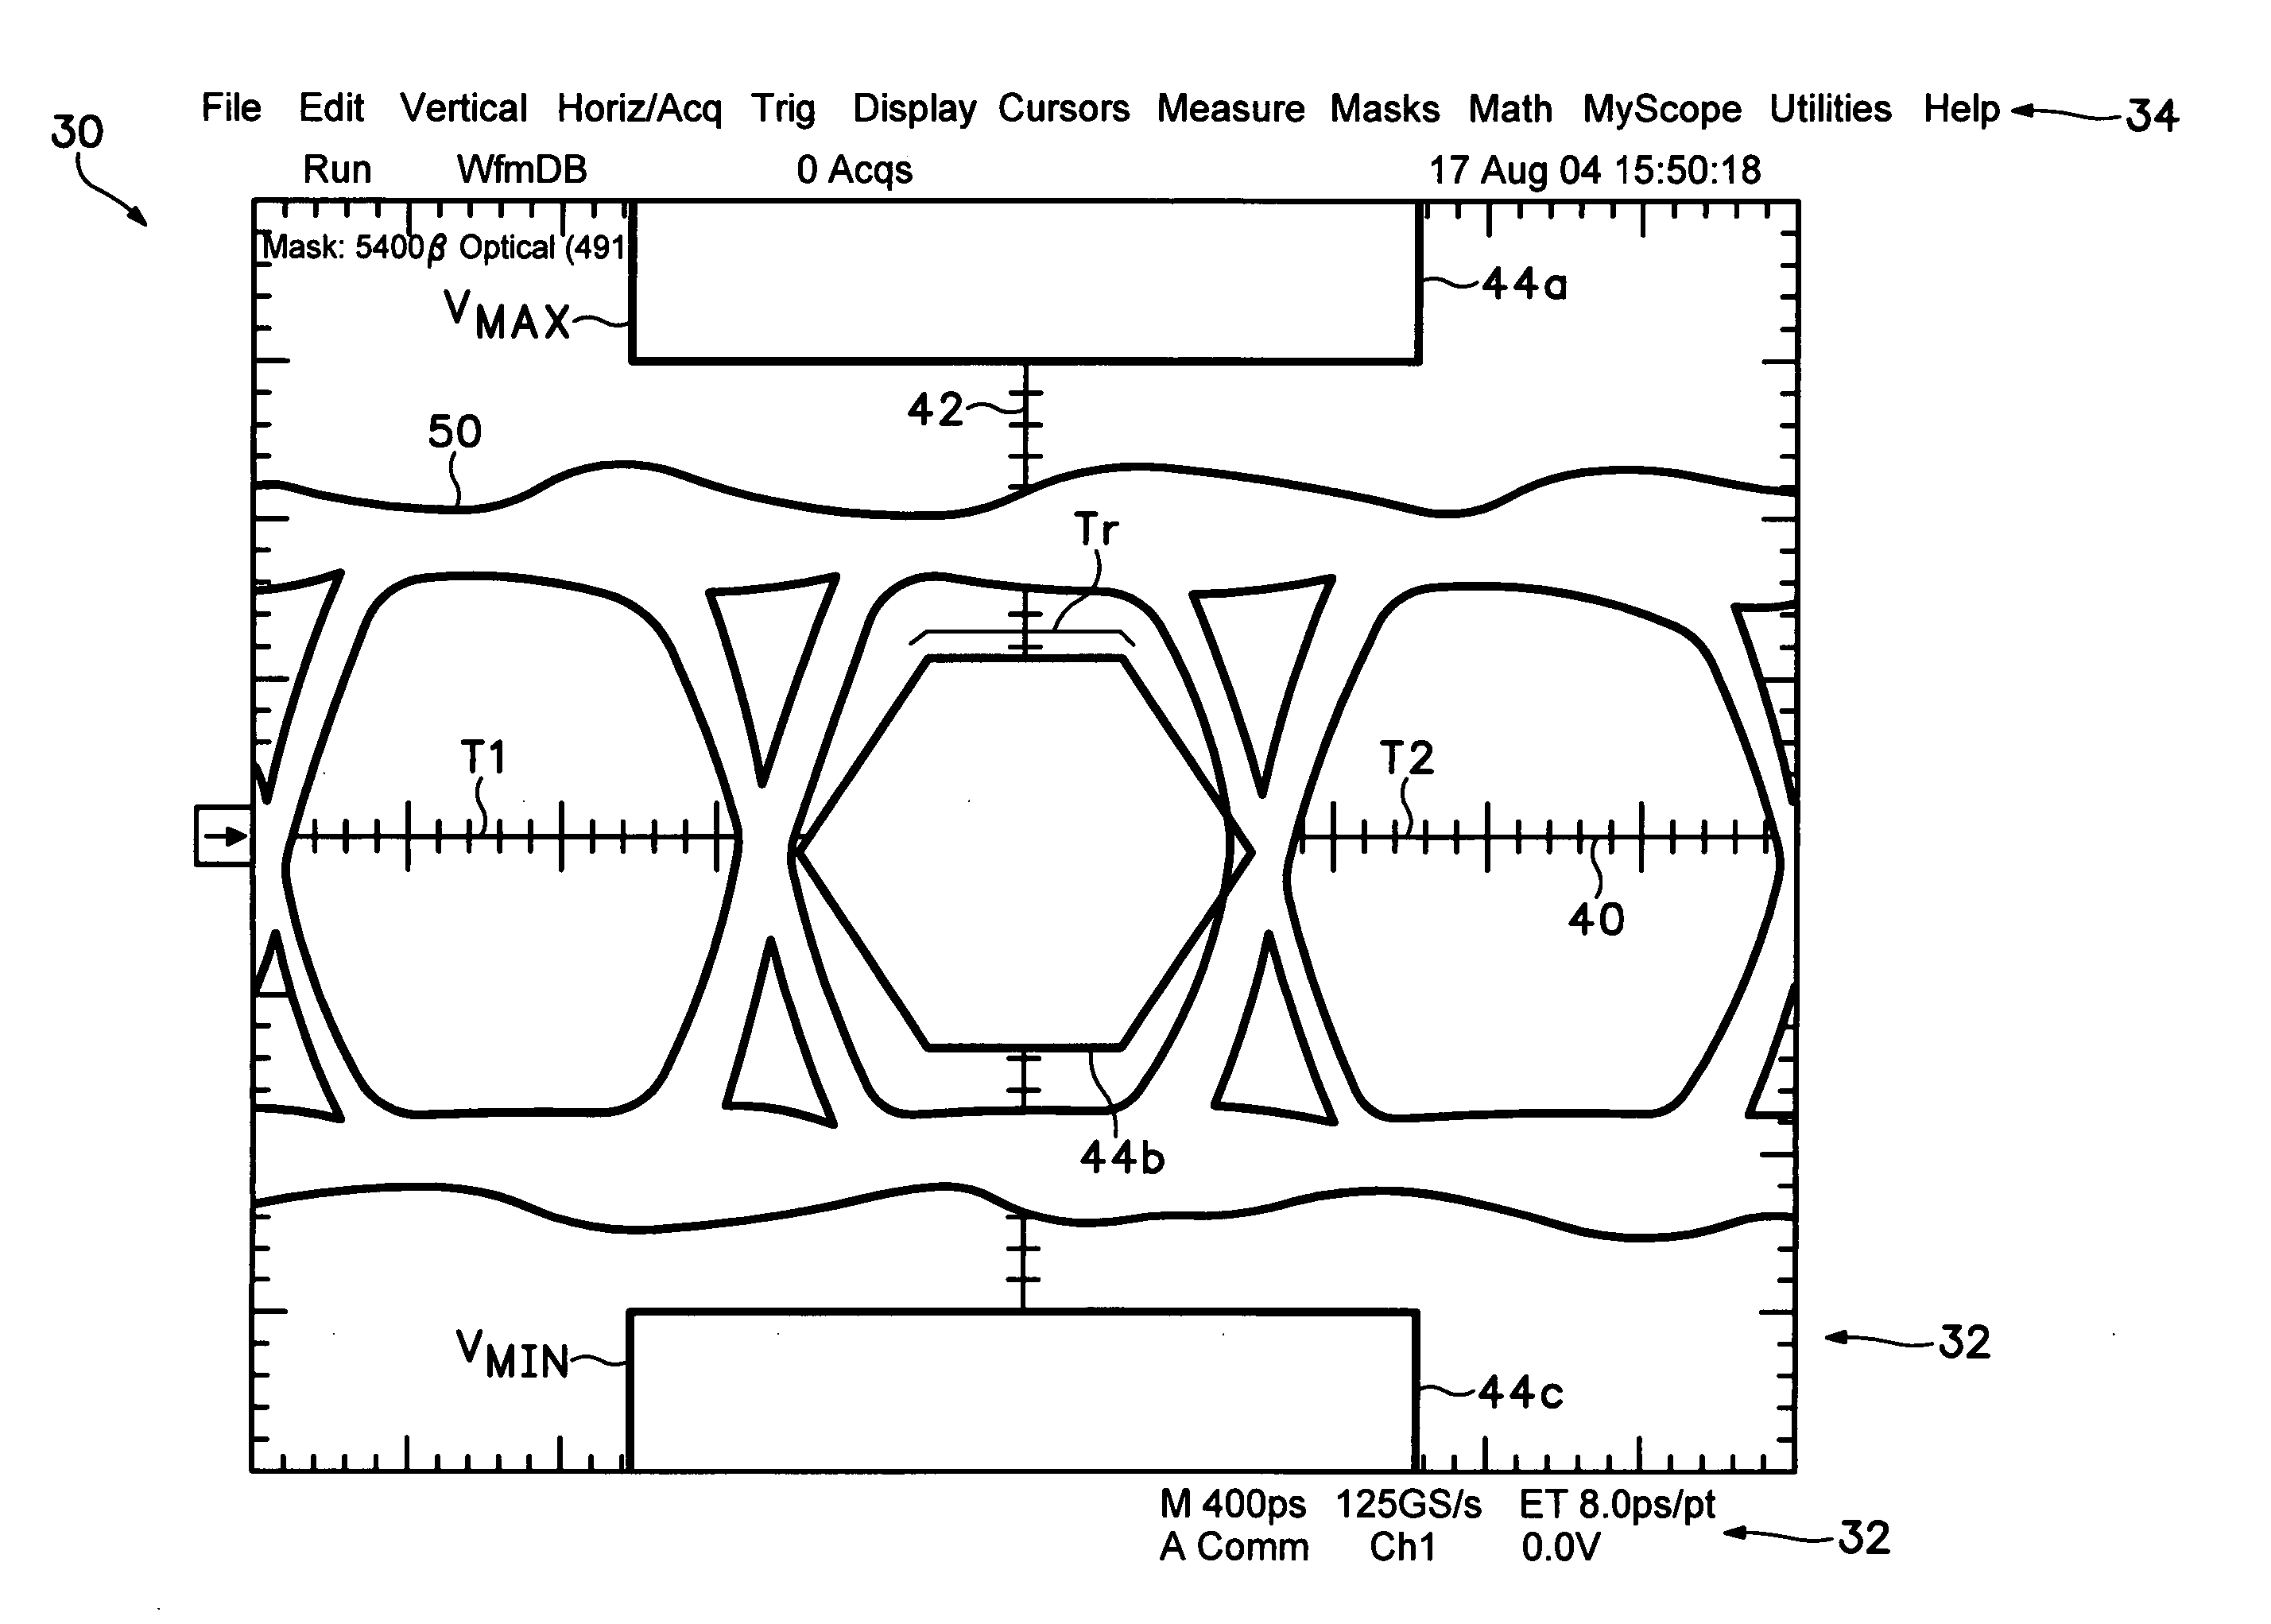 Method and apparatus for visually indicating mask violation locations